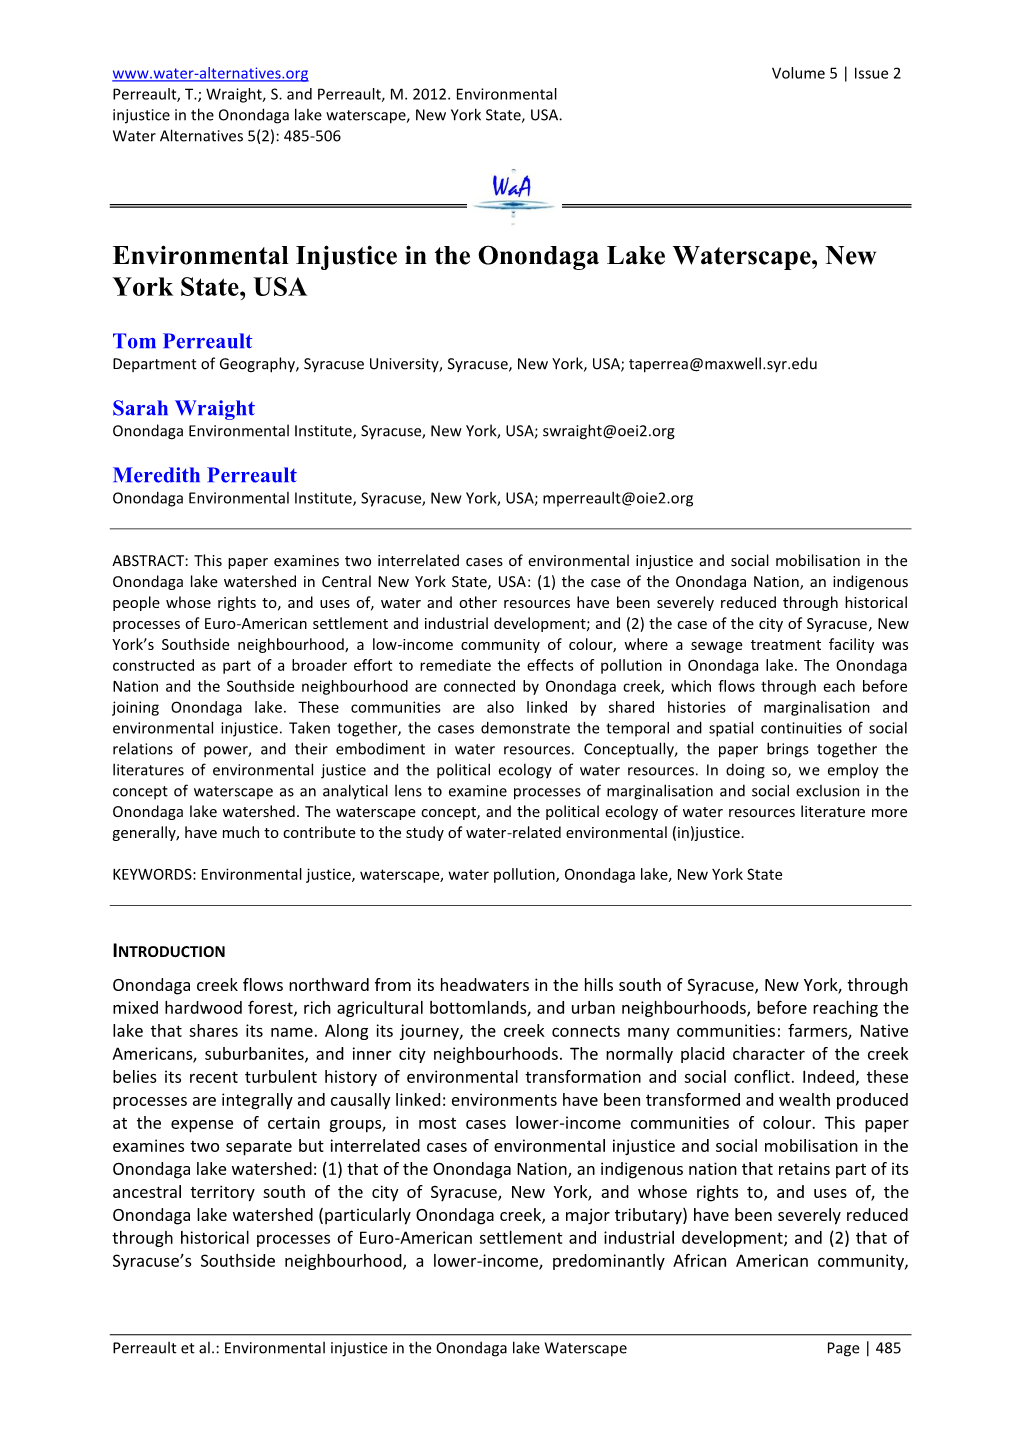 Environmental Injustice in the Onondaga Lake Waterscape, New York State, USA